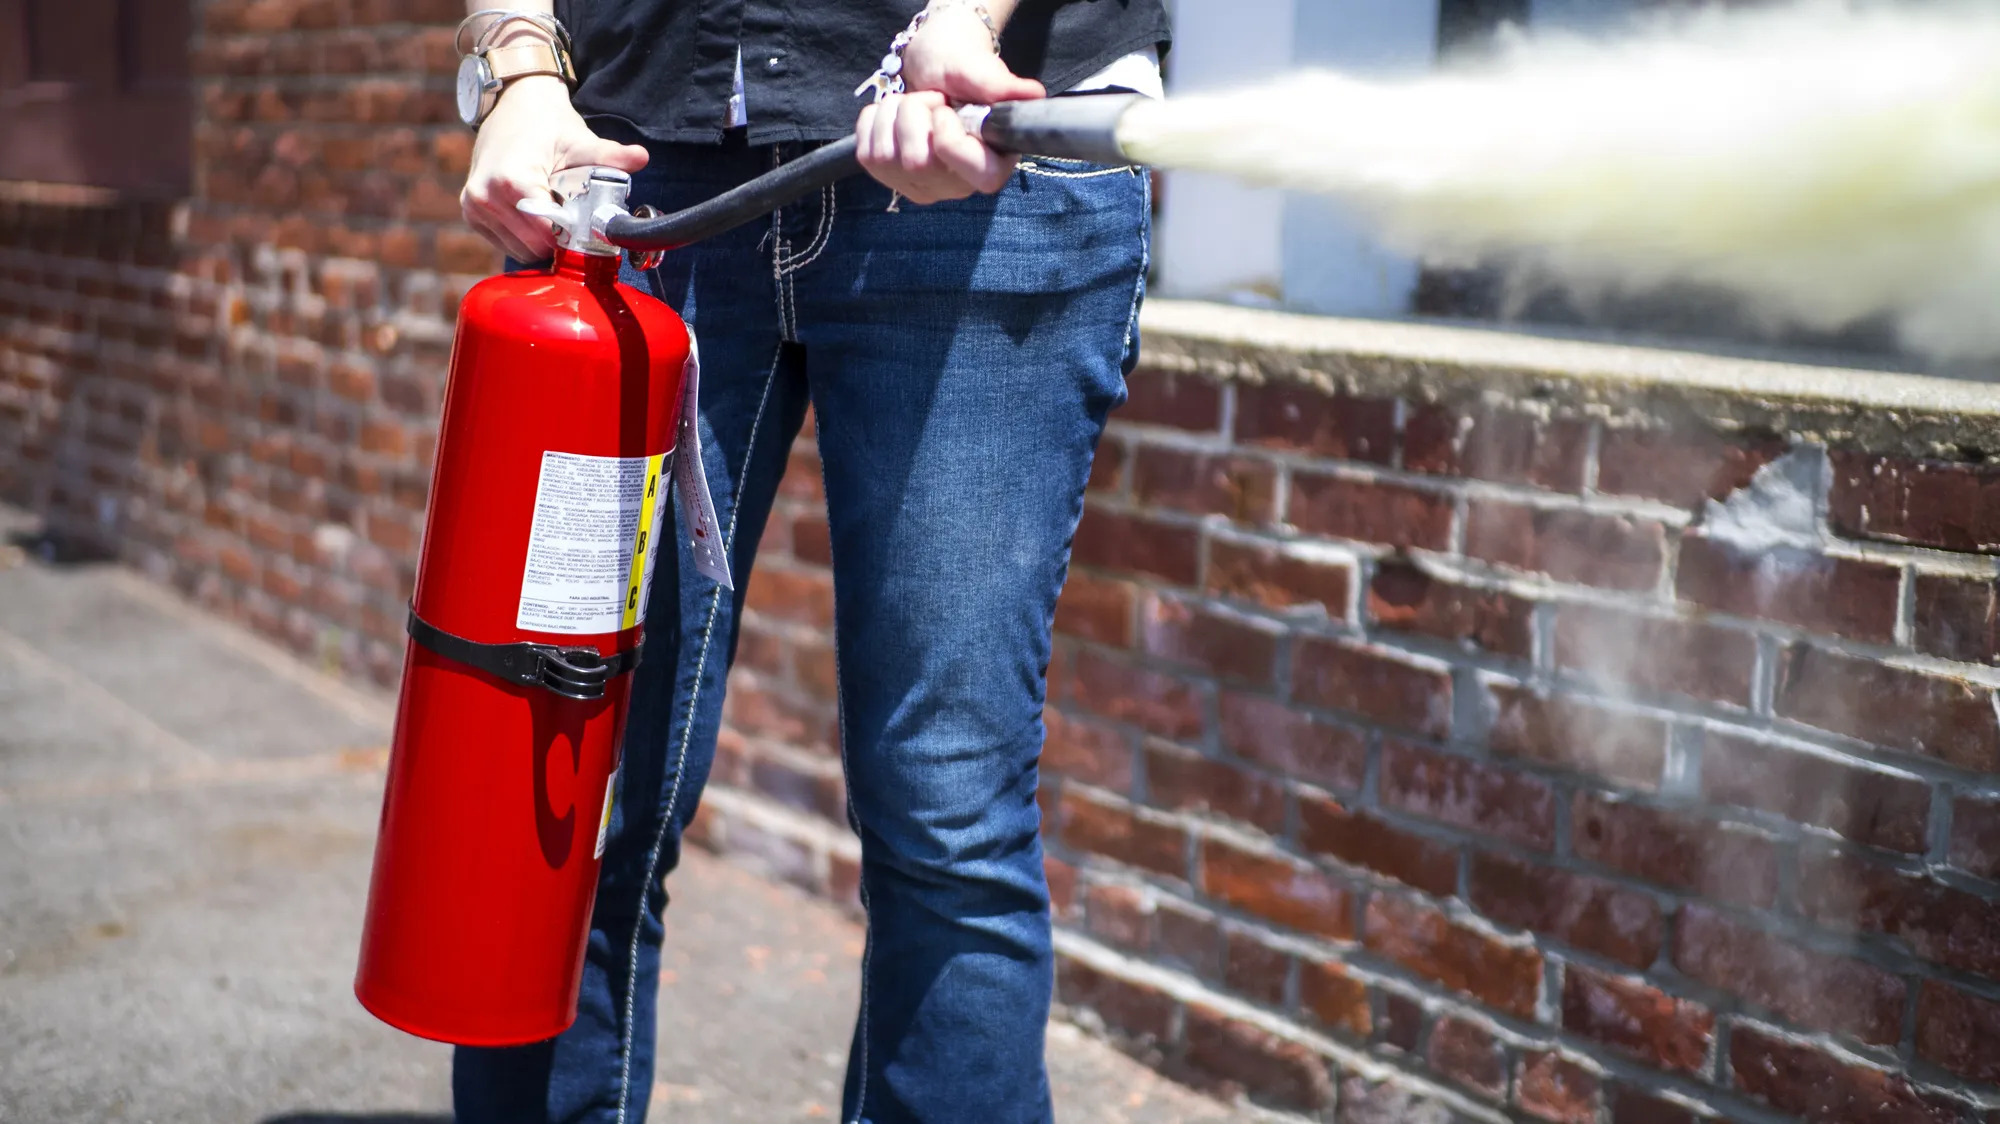 Keep a fire extinguisher handy, and know how to use it properly